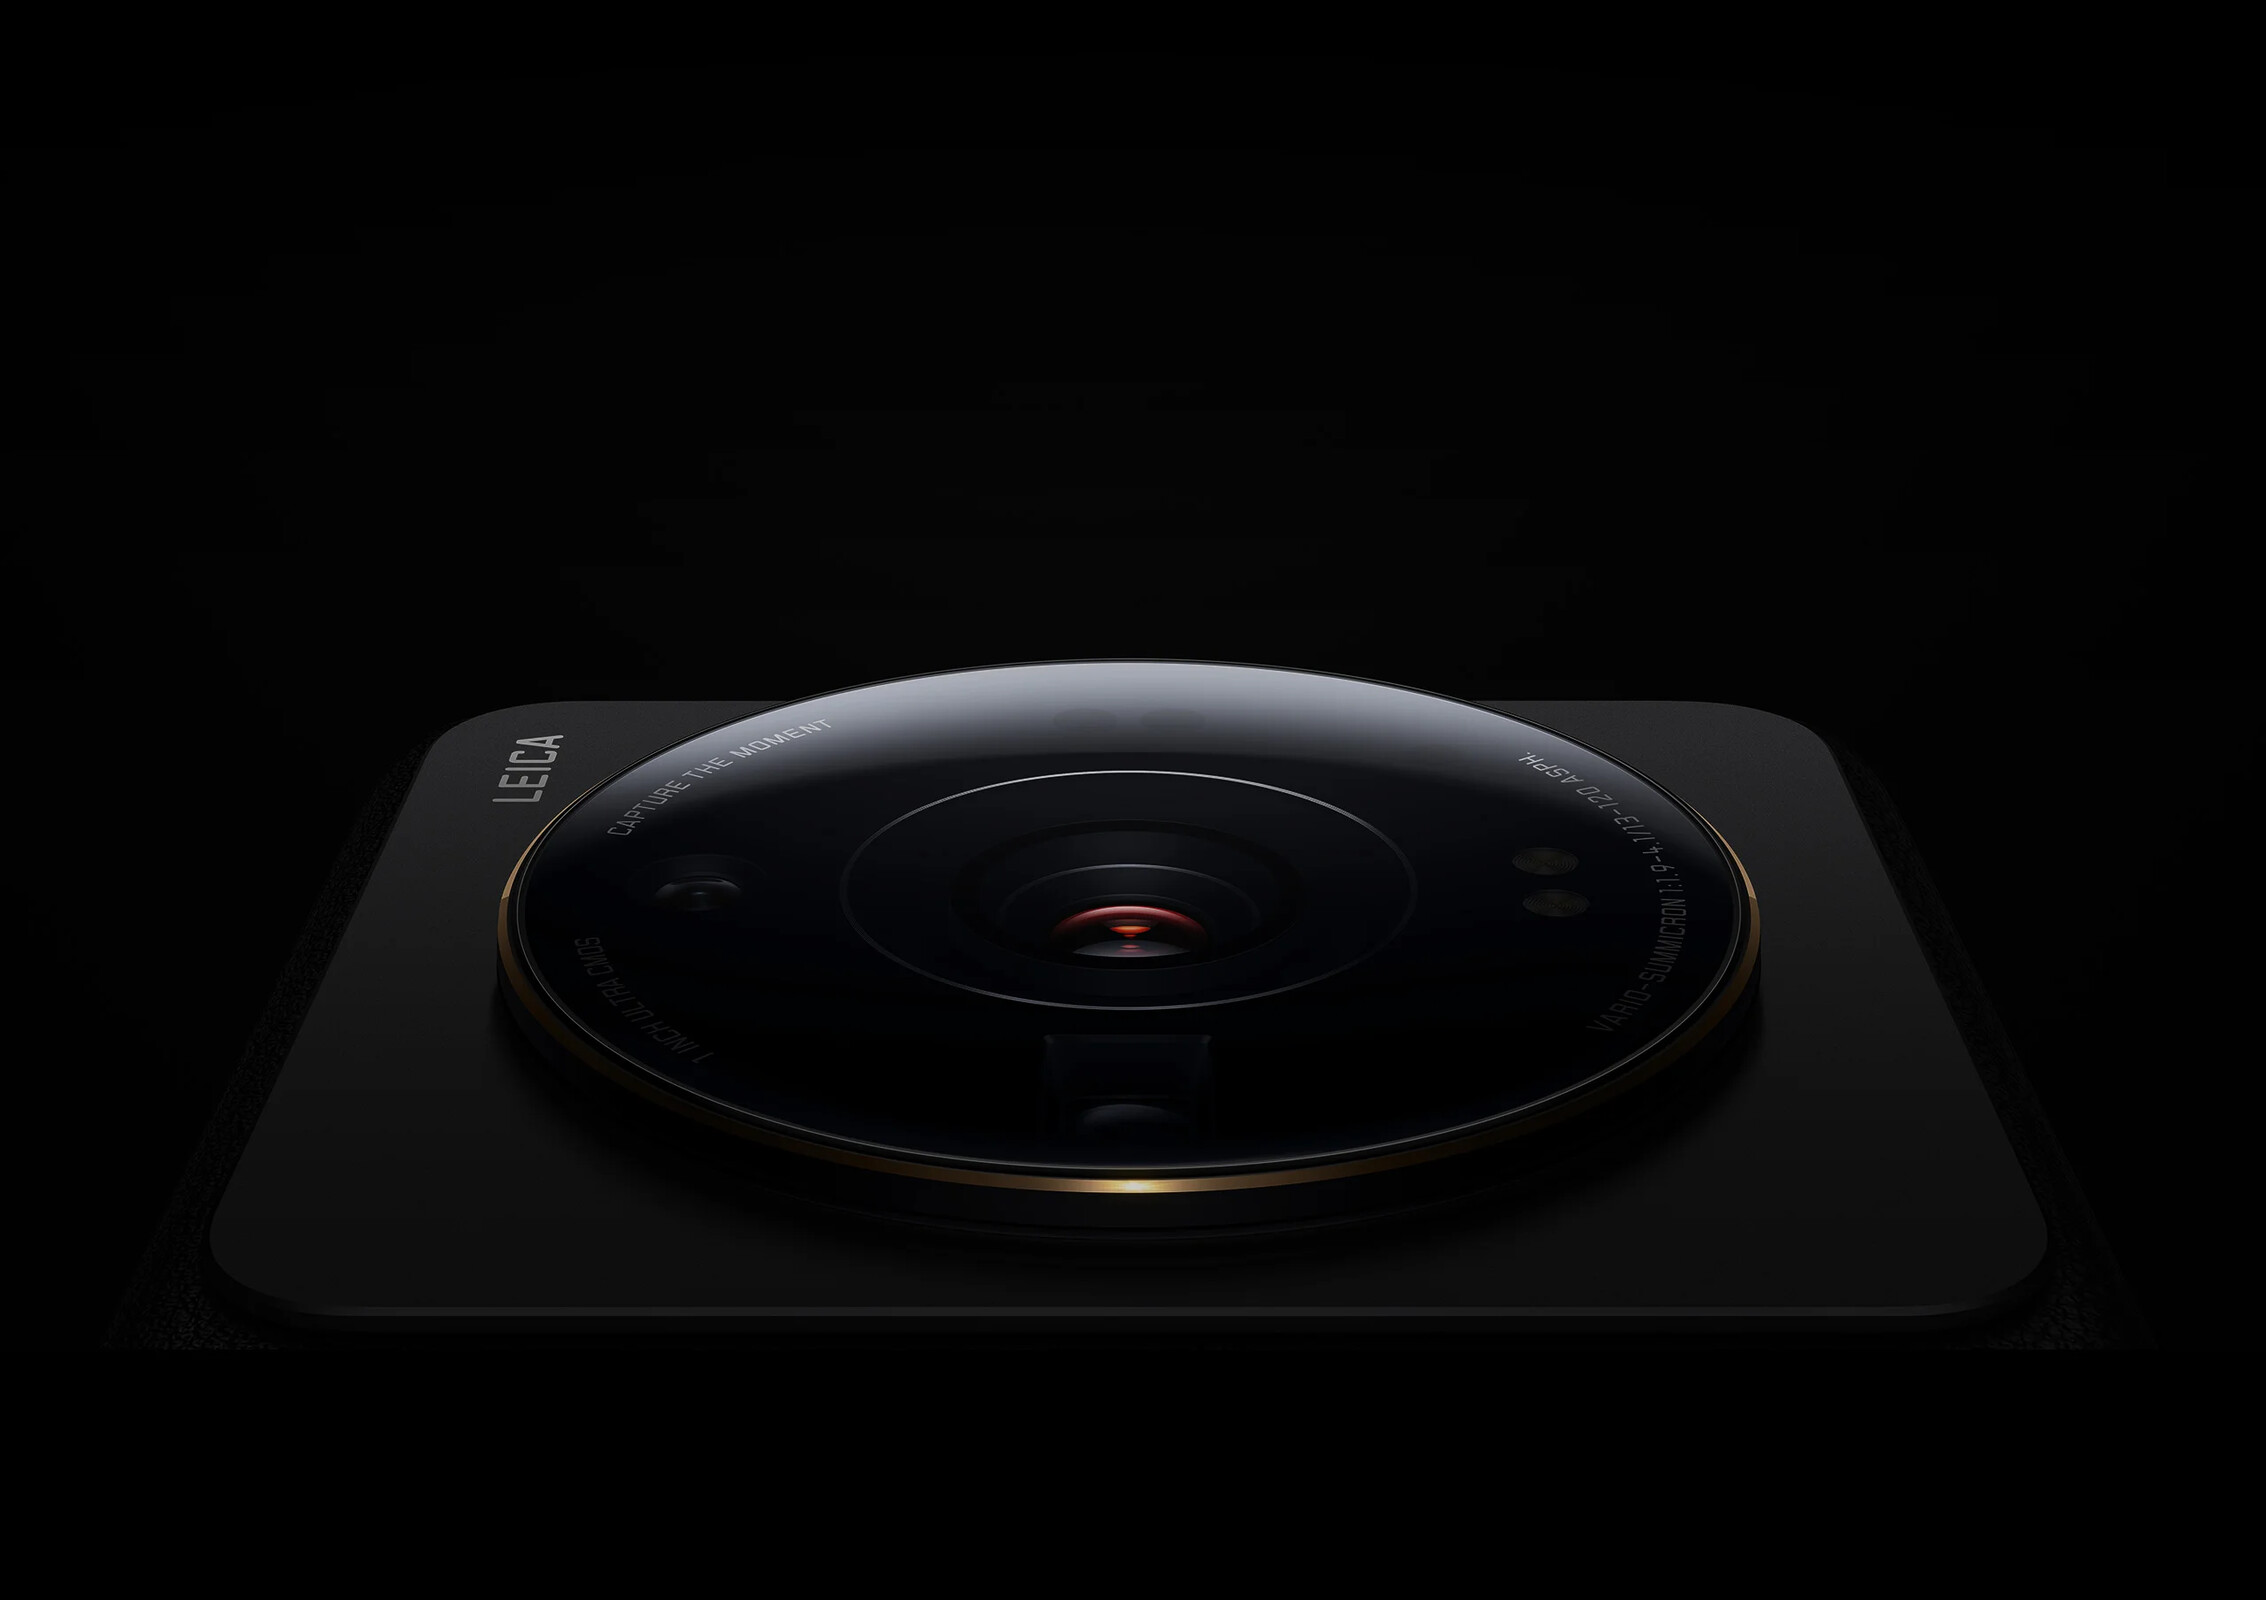 Xiaomi 13 Ultra Tipped to Get a Vastly Improved Periscope Camera